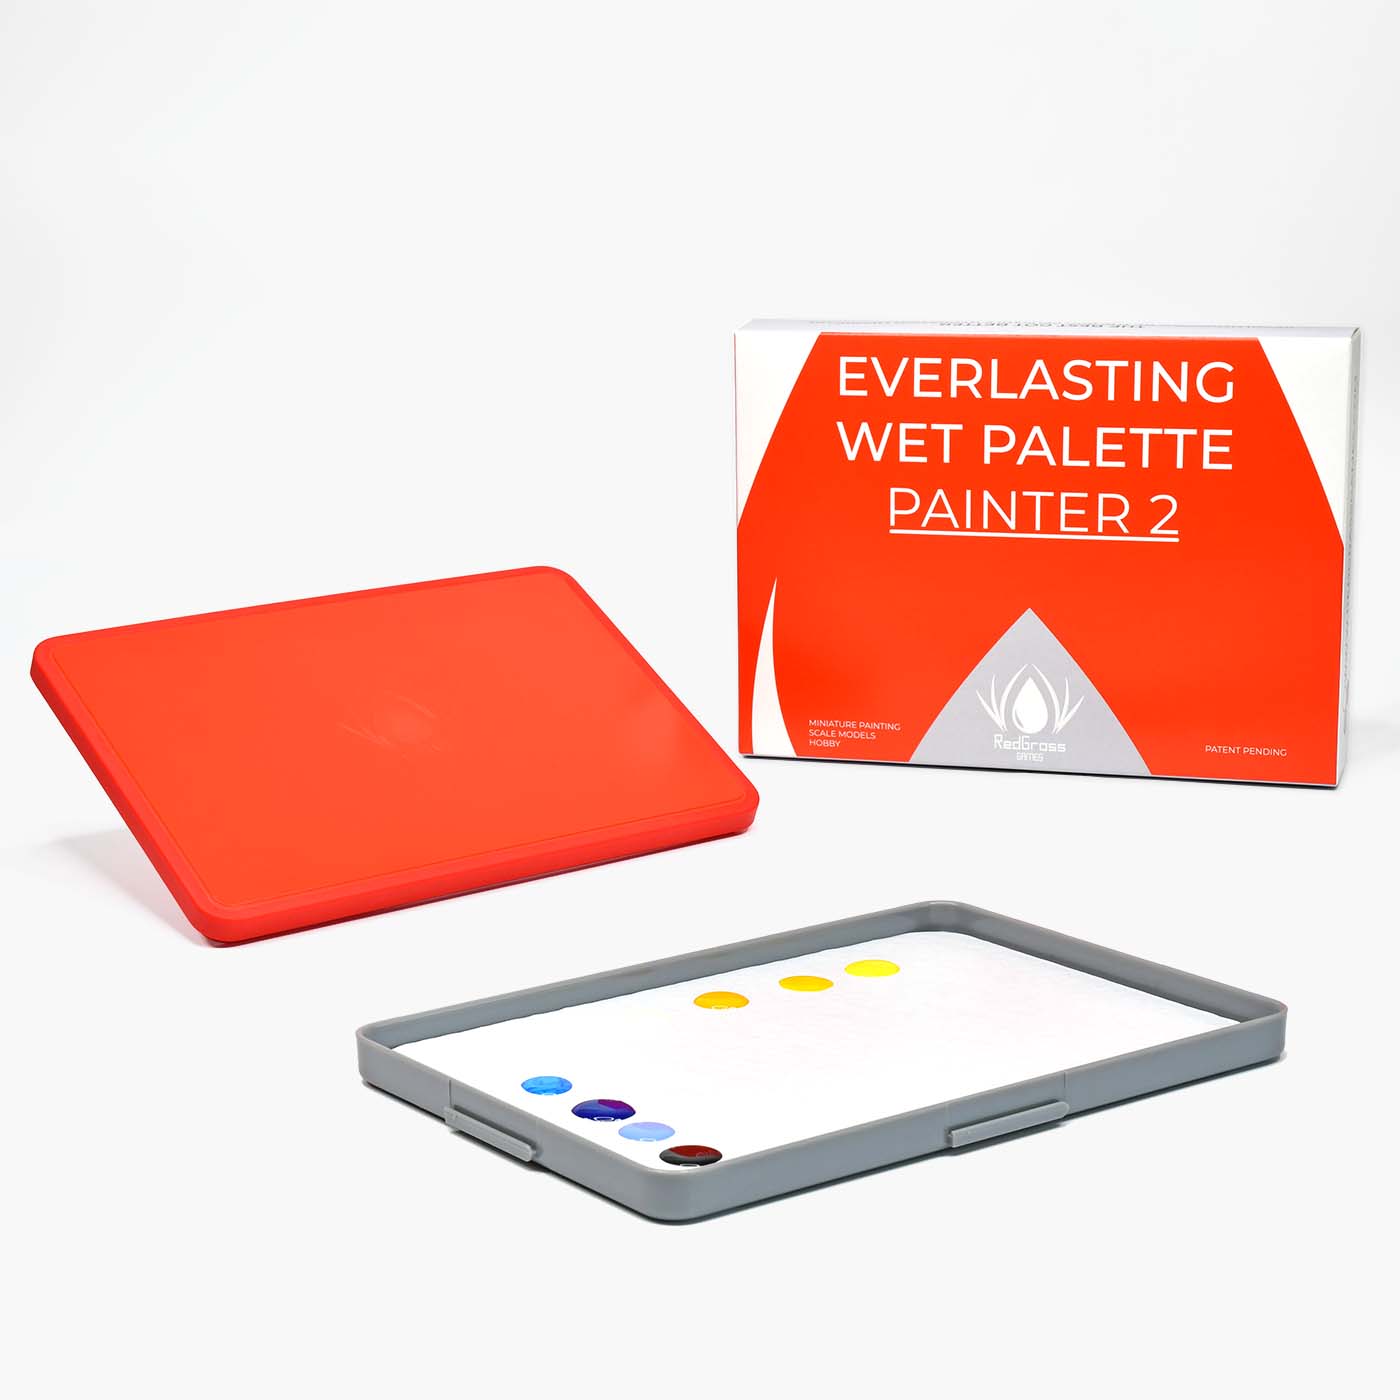 Under $20 Affordable Wet Palette For Painting Miniatures